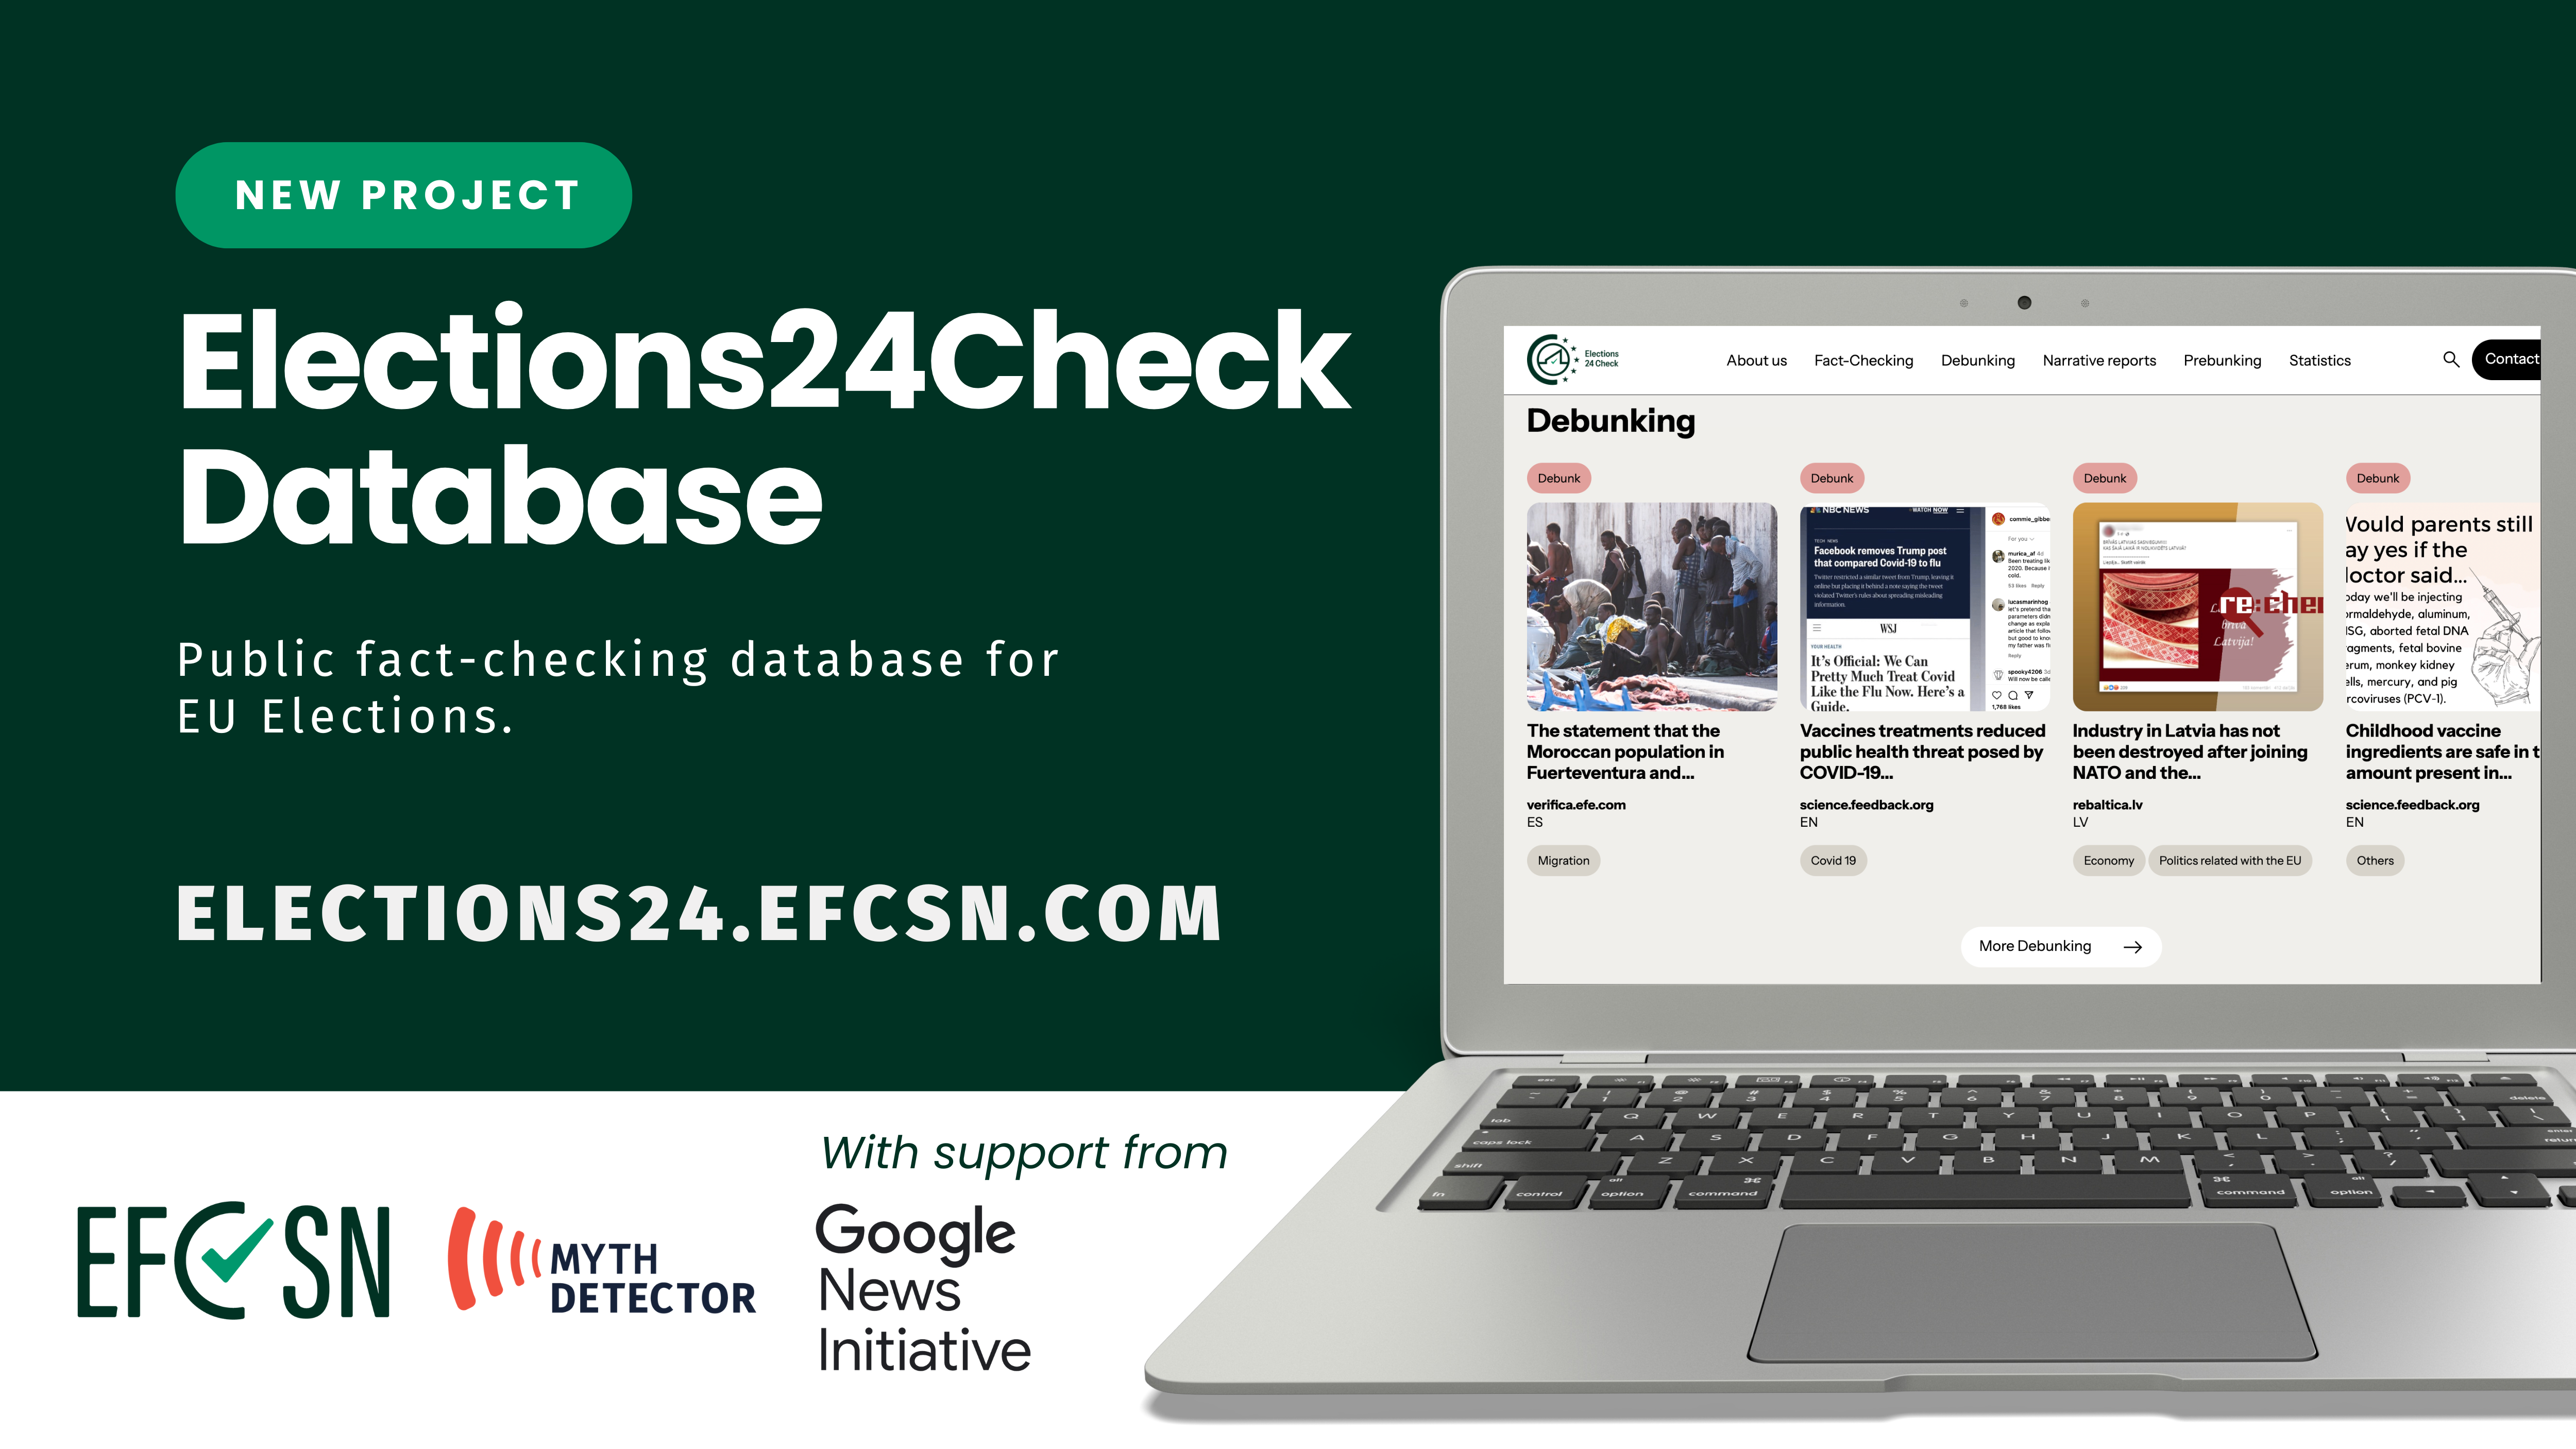 Elections24Check Launch Member Template 1600 x 900 Myth Detector participates in creating biggest fact-checking database for European Elections